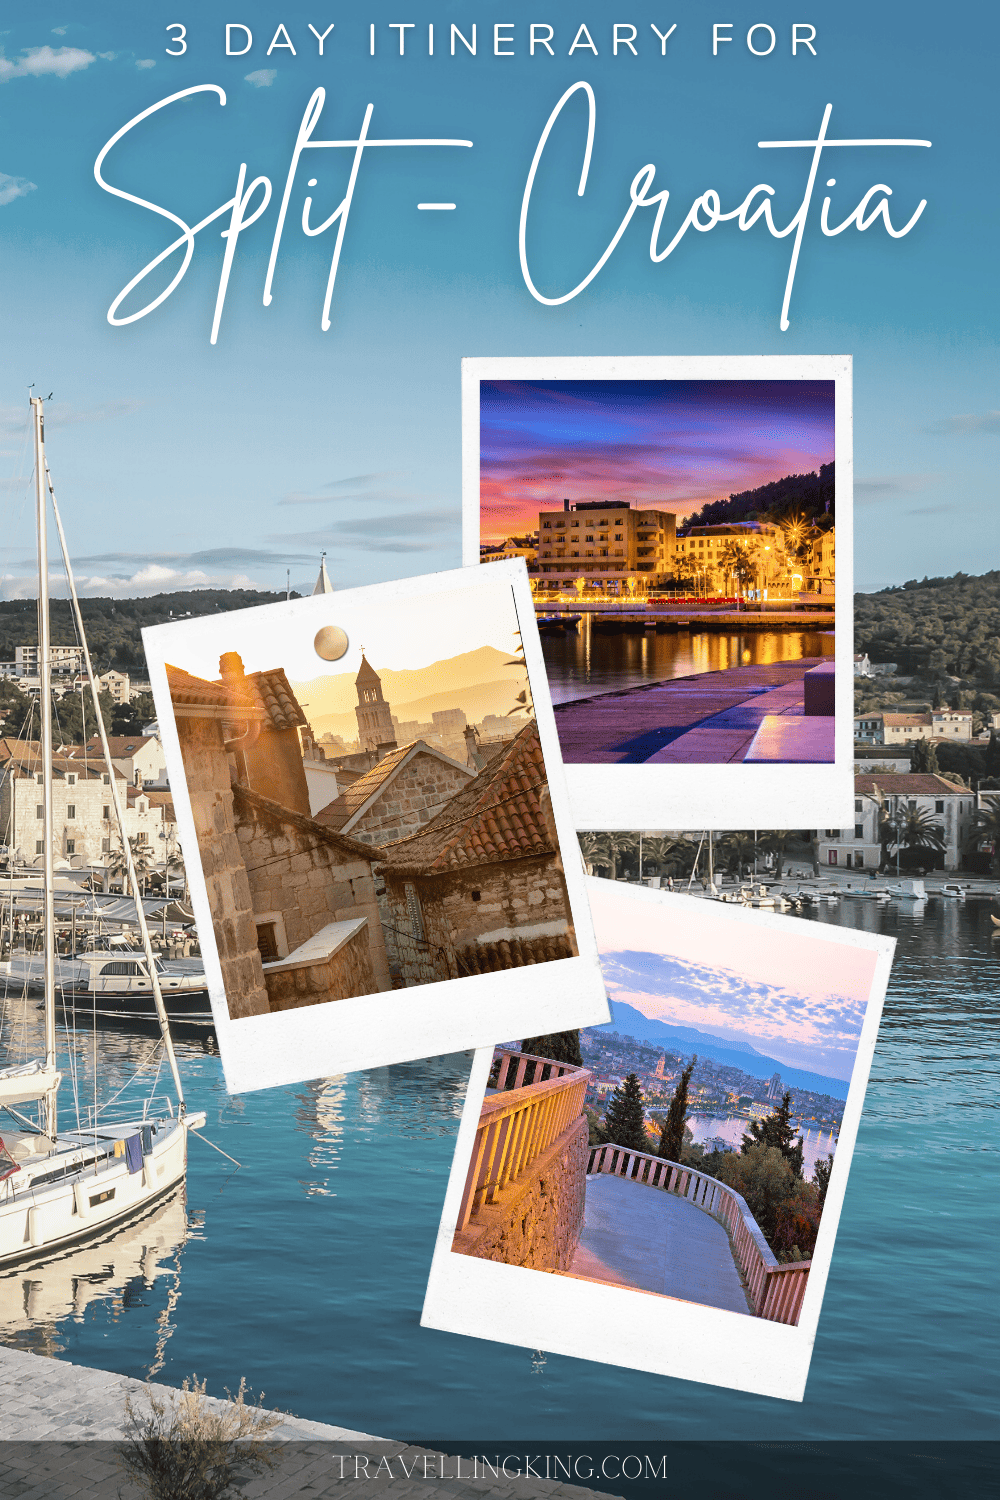 3 Day Itinerary for Split